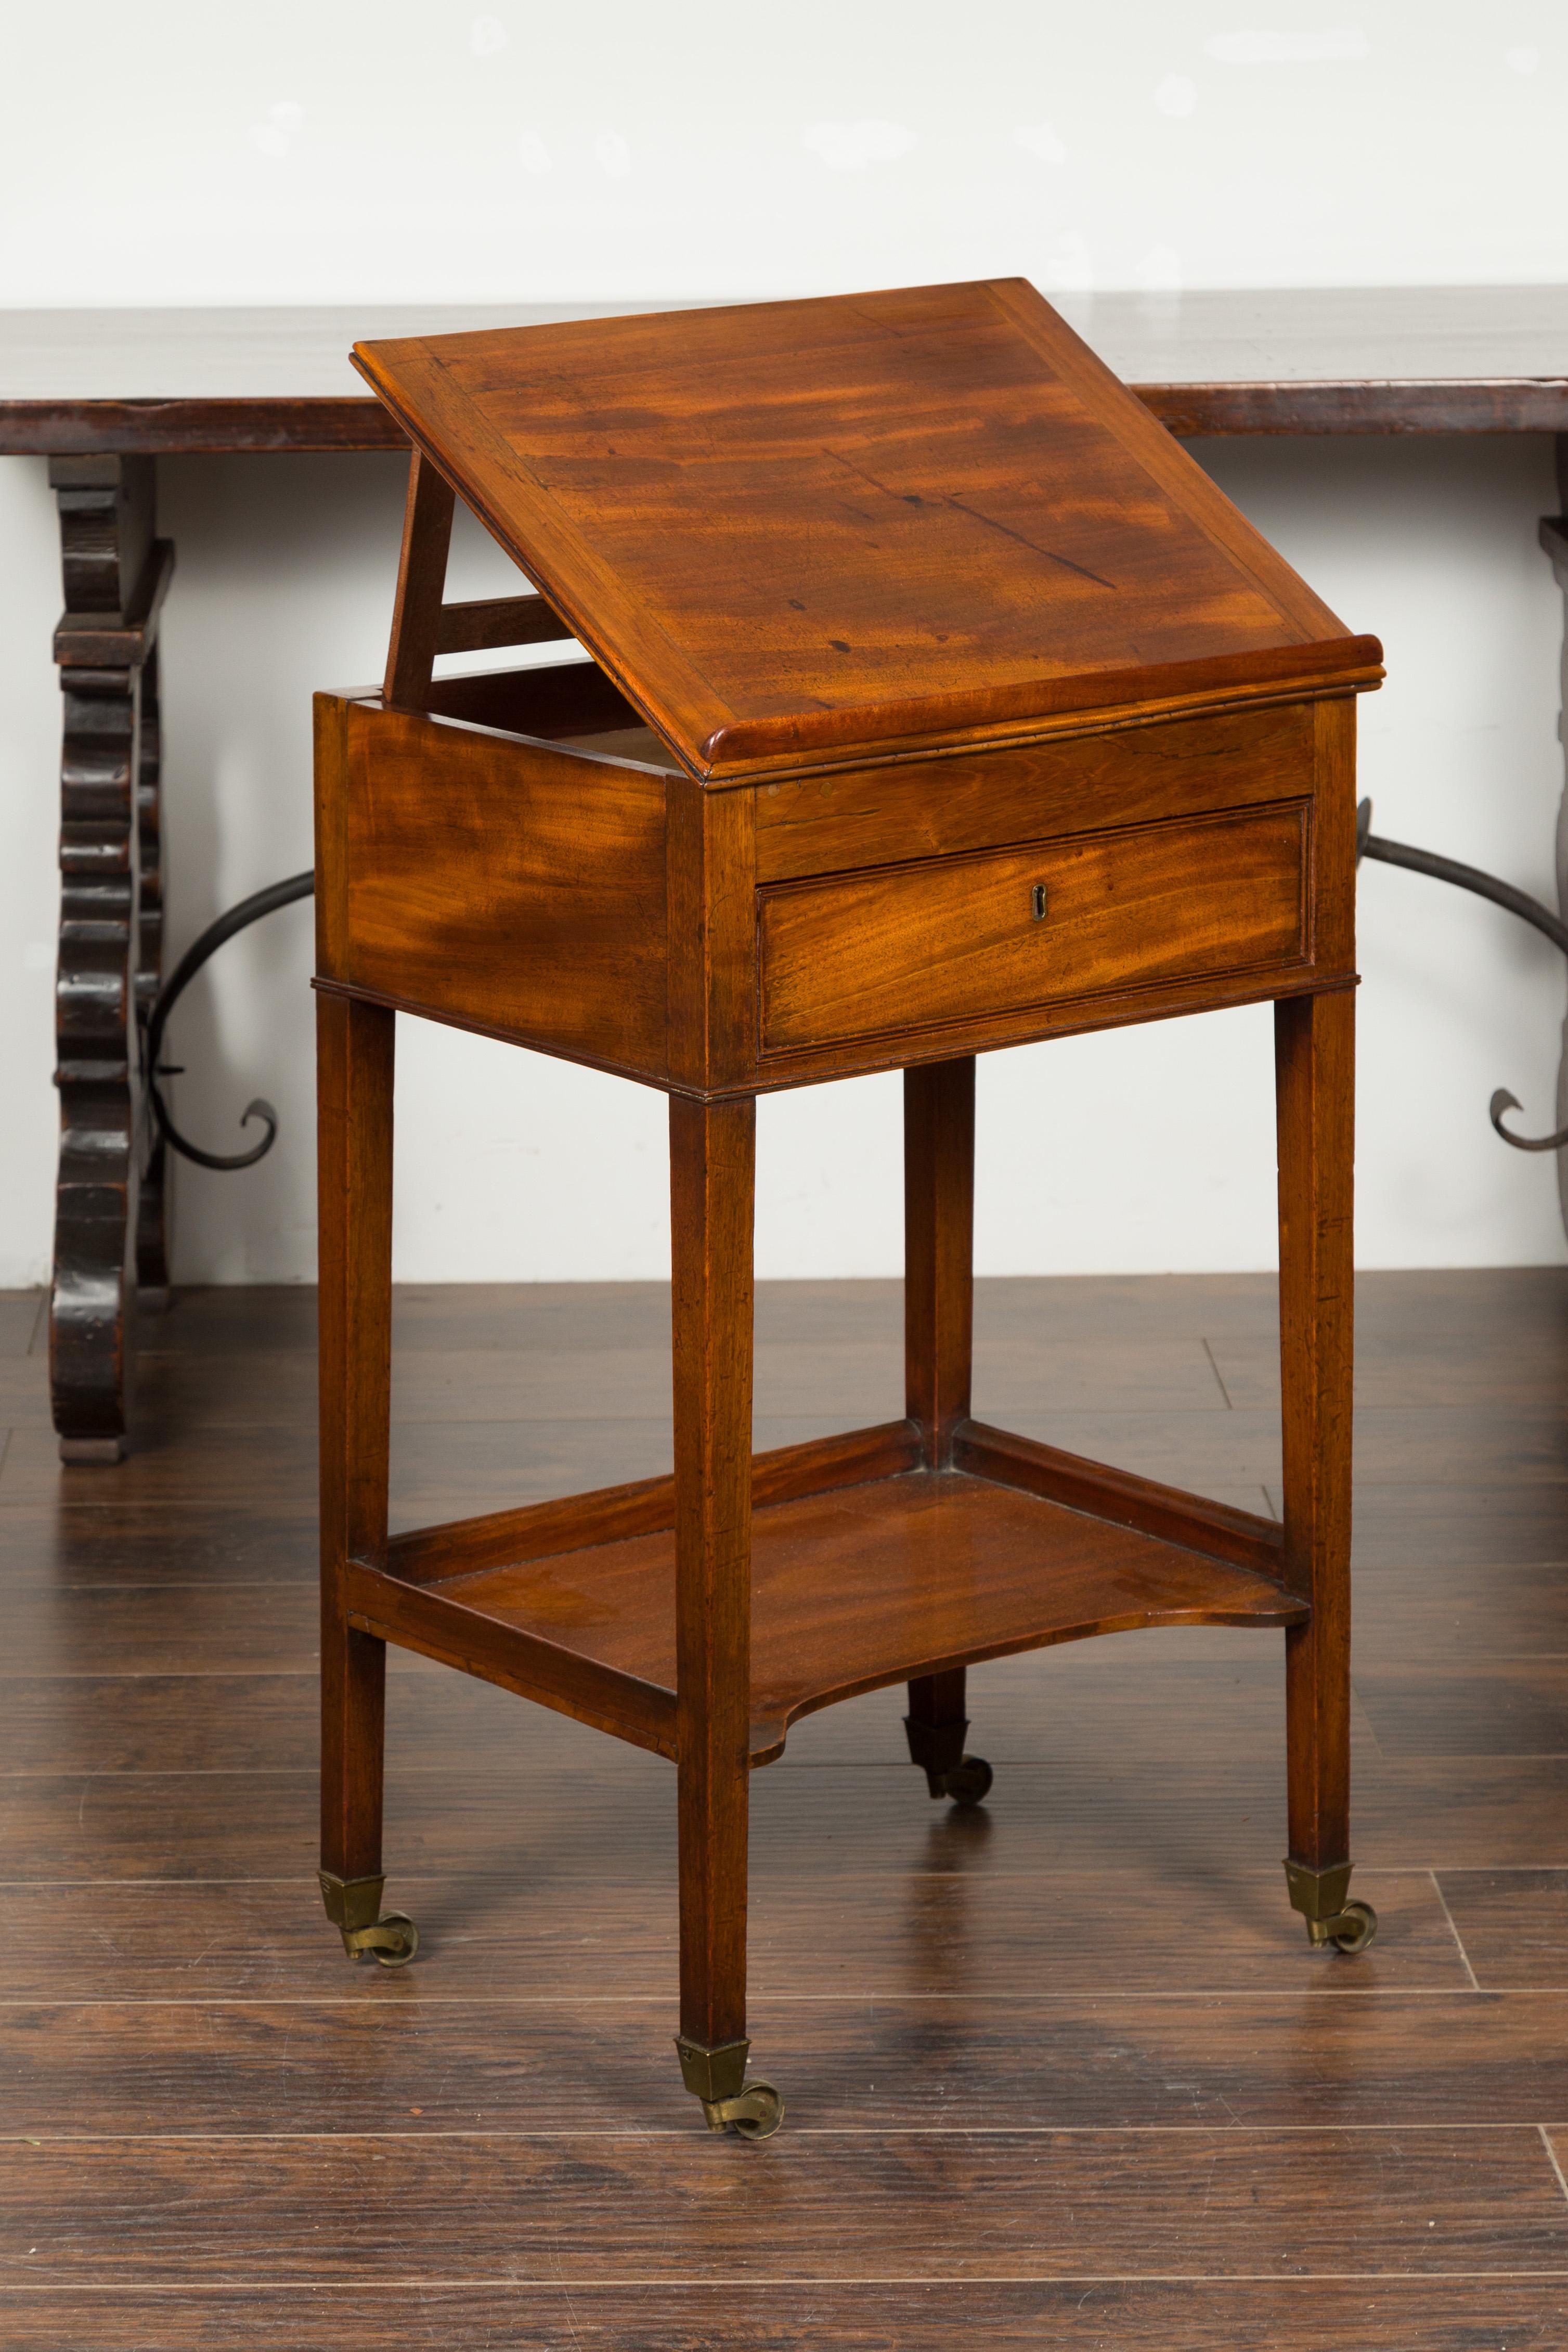 19th Century English 1820s Mahogany Architect's Table with Tilt Top, Single Drawer and Shelf